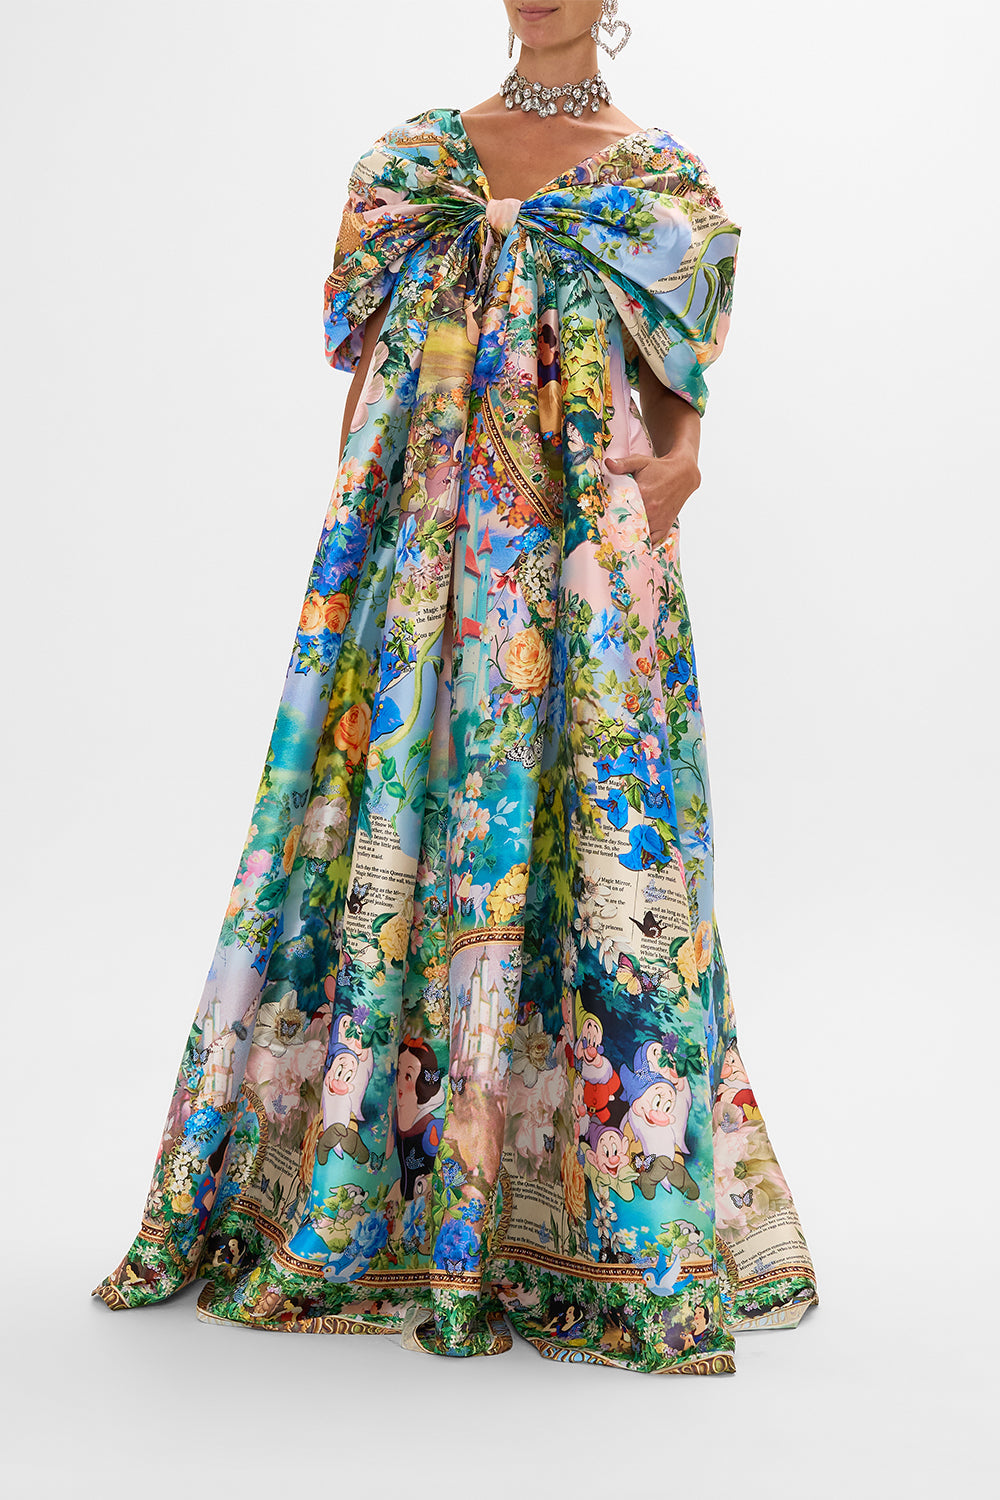 Disney CAMILLA maxi dress in The Kindest One Of All print